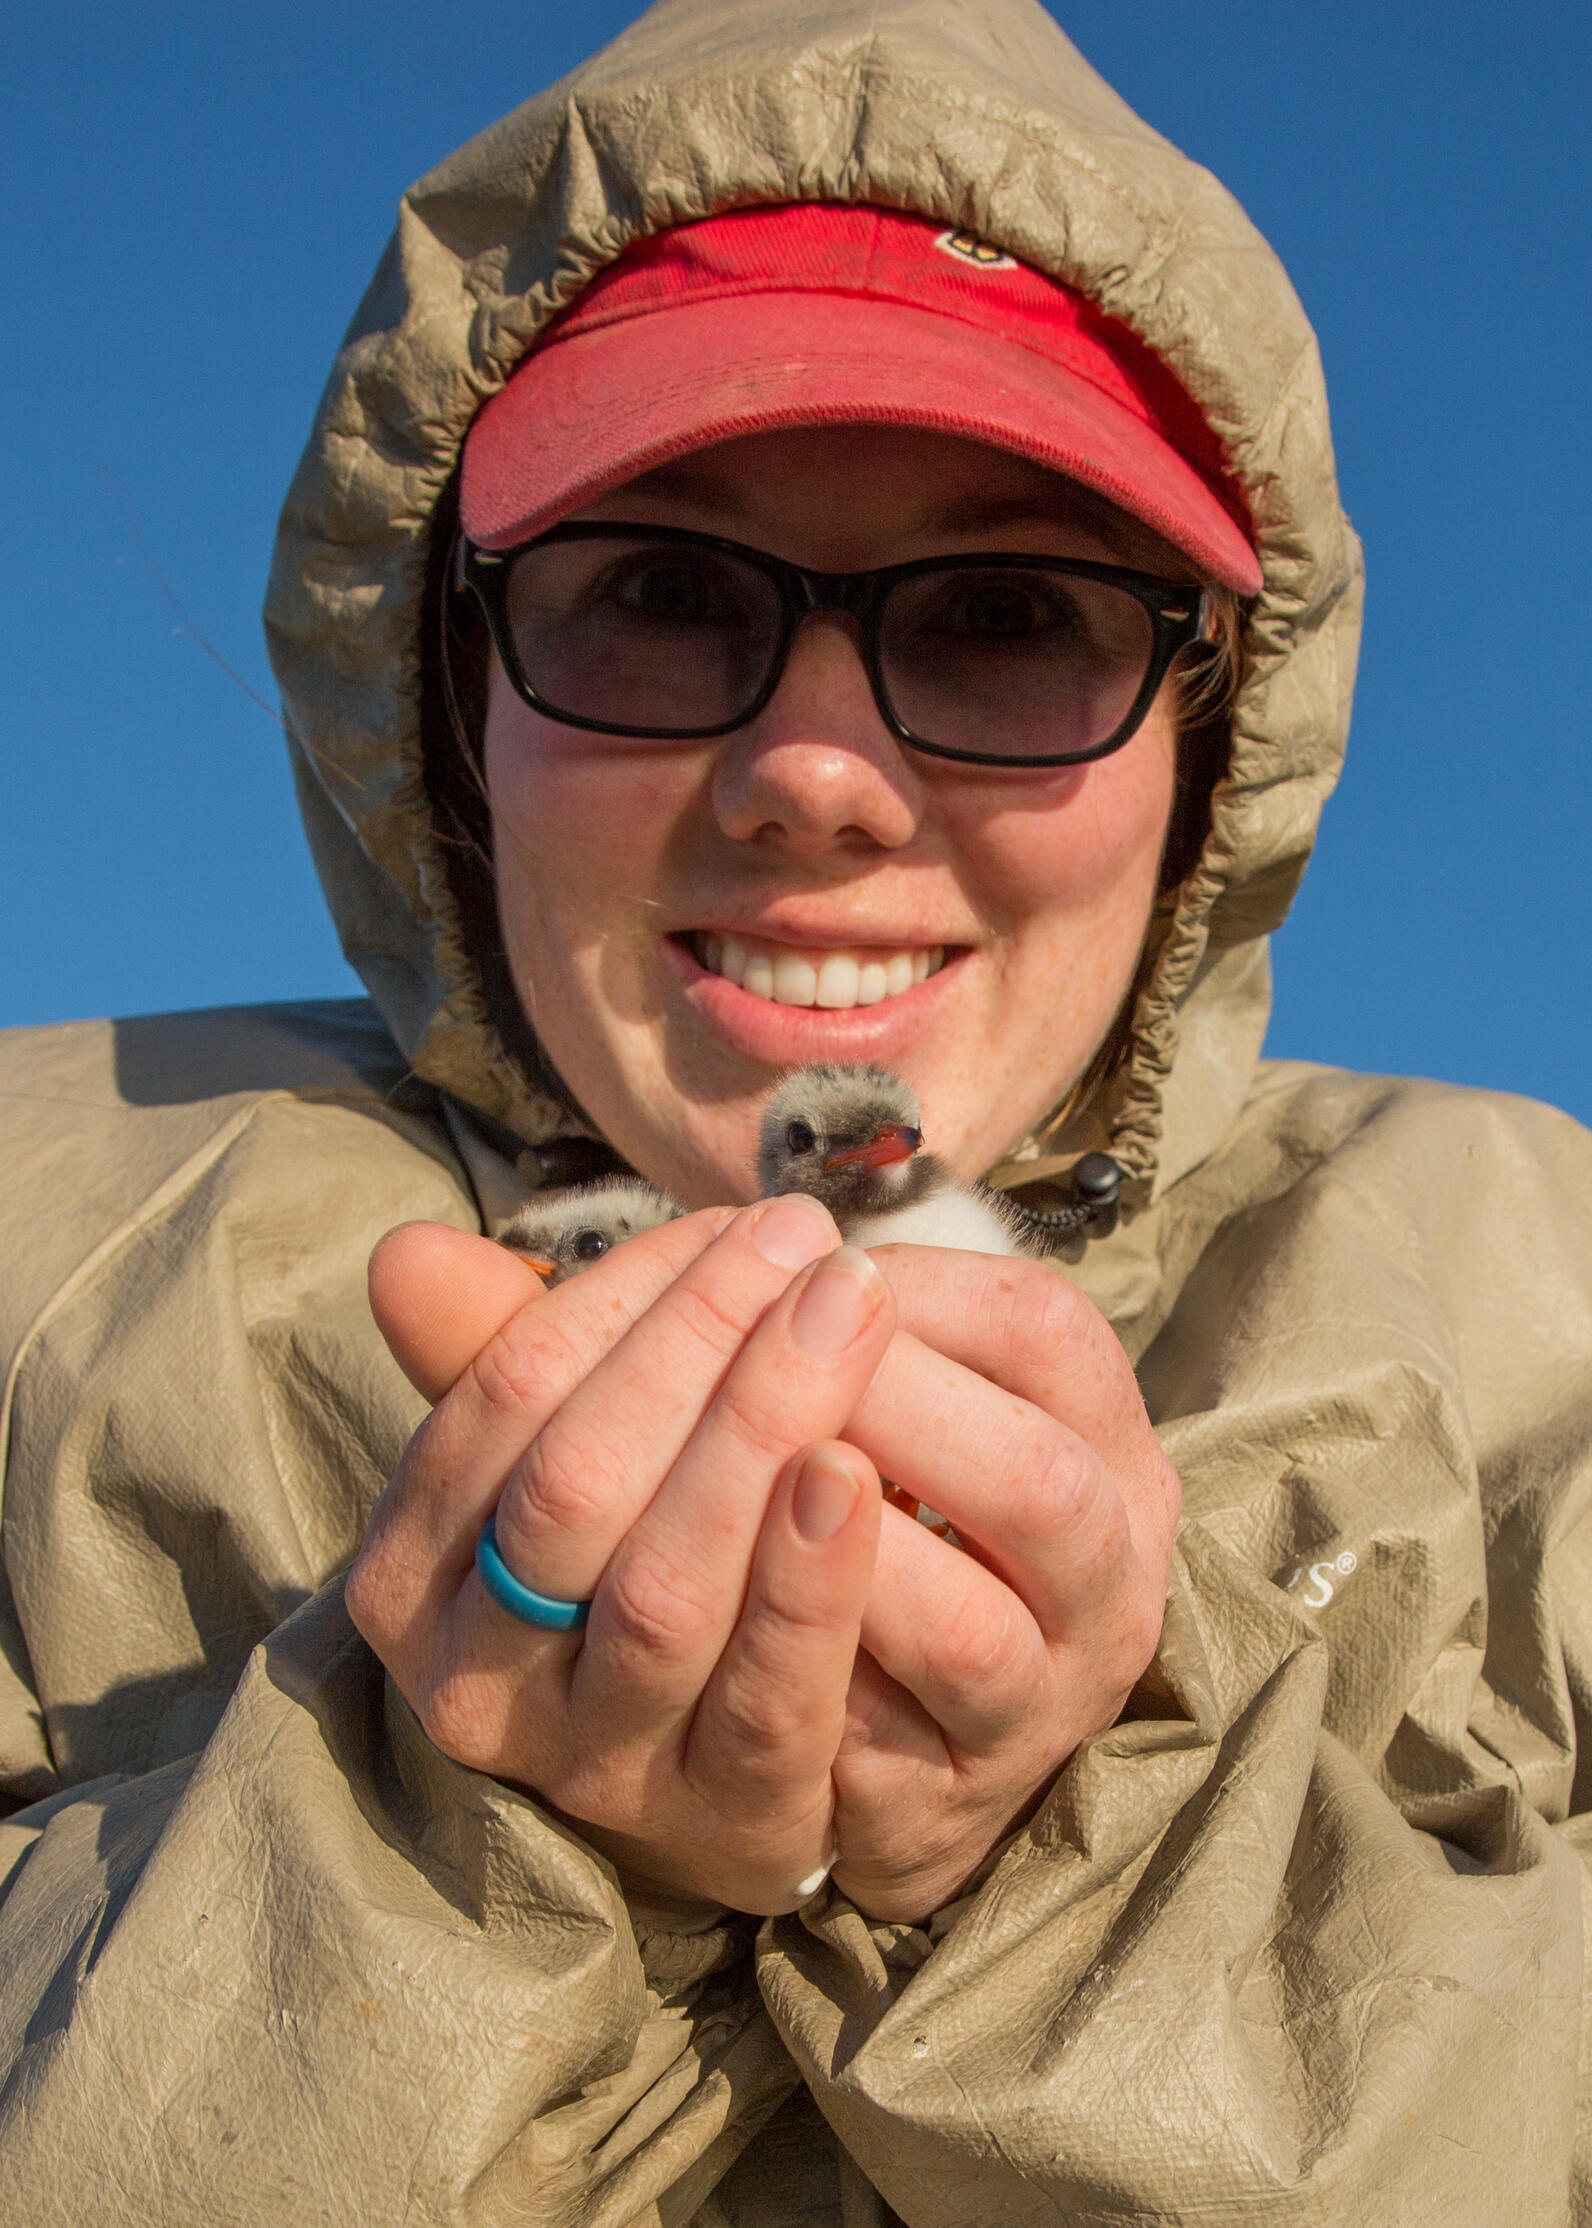 Matinicus Rock Researcher with Chick